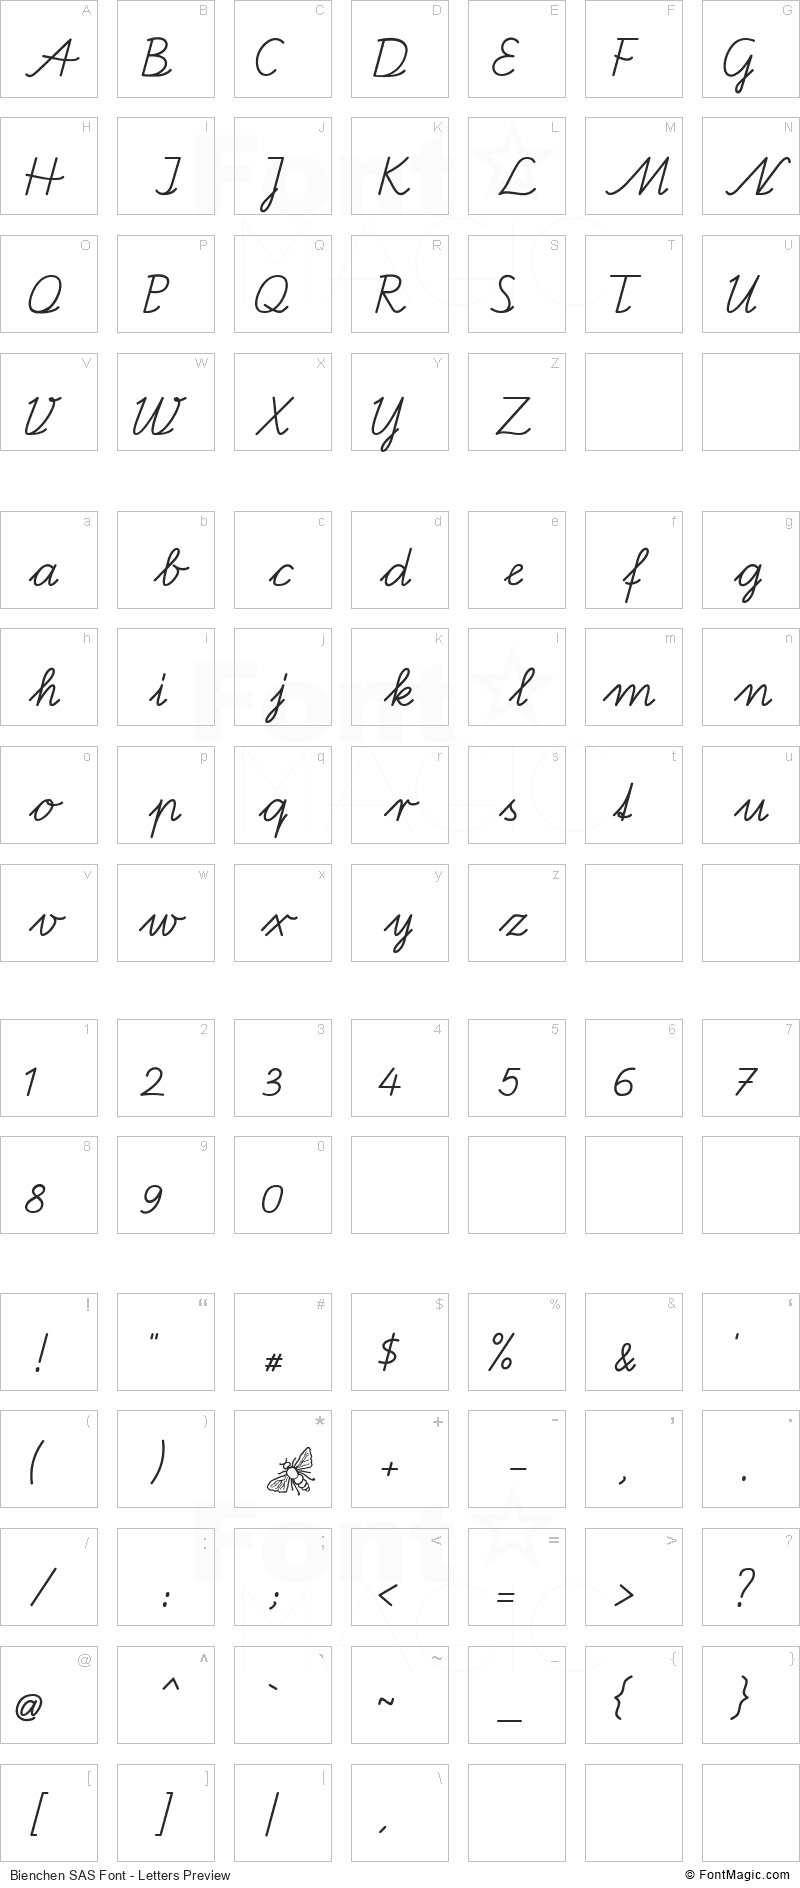 Bienchen SAS Font - All Latters Preview Chart